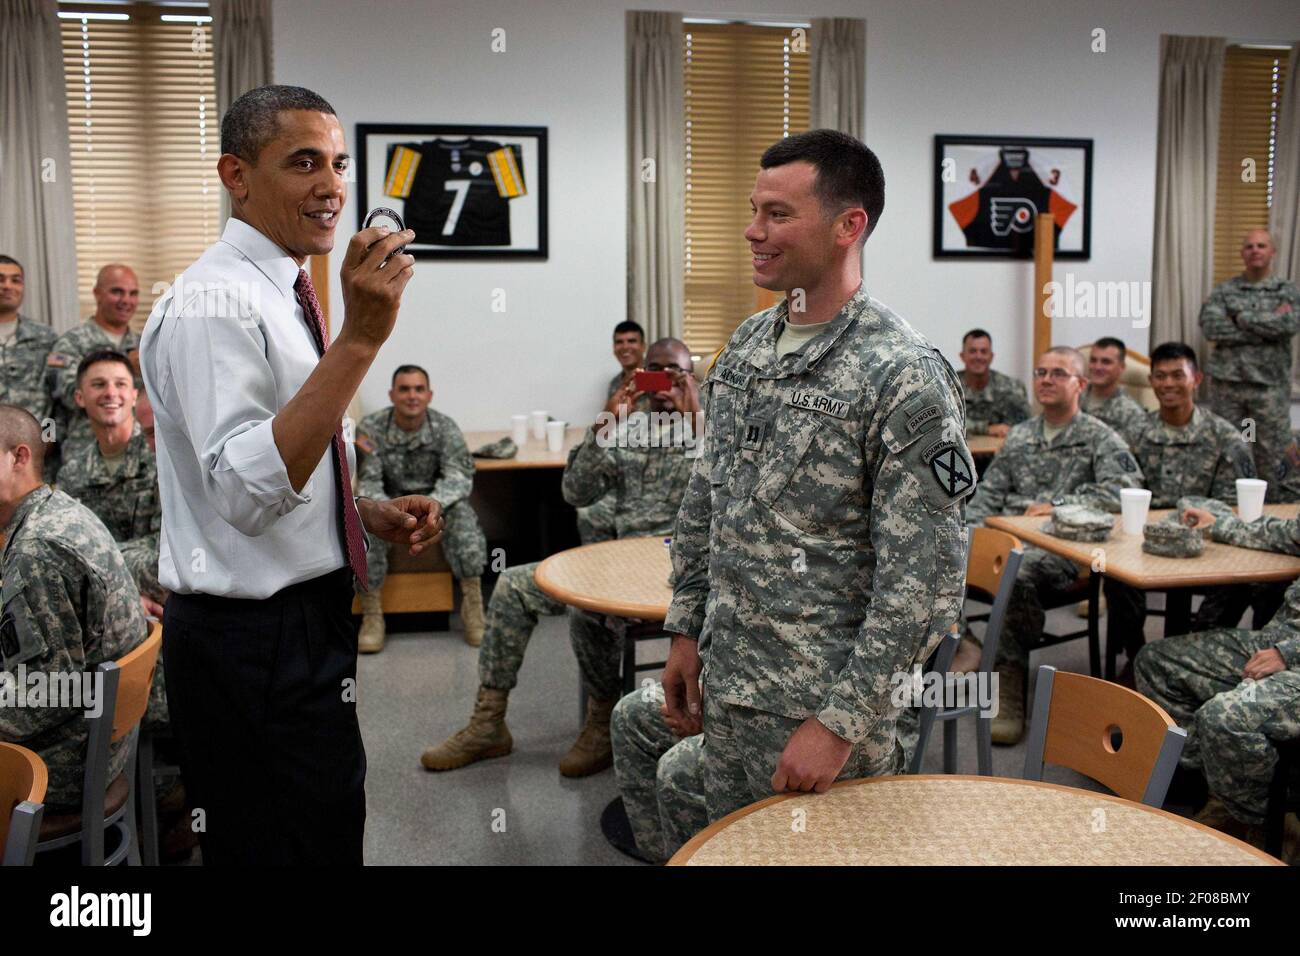 23 June 2011 - Fort Drum, NY - President Barack Obama speaks to soldiers of the 10th Mountain Division during a visit to Fort Drum in New York, June 23, 2011. Photo Credit: Pete Souza/White House/Sipa Press This official White House photograph is being made available only for publication by news organizations and/or for personal use printing by the subject(s) of the photograph. The photograph may not be manipulated in any way and may not be used in commercial or political materials, advertisements, emails, products, promotions that in any way suggests approval or endorsement of the President,  Stock Photo